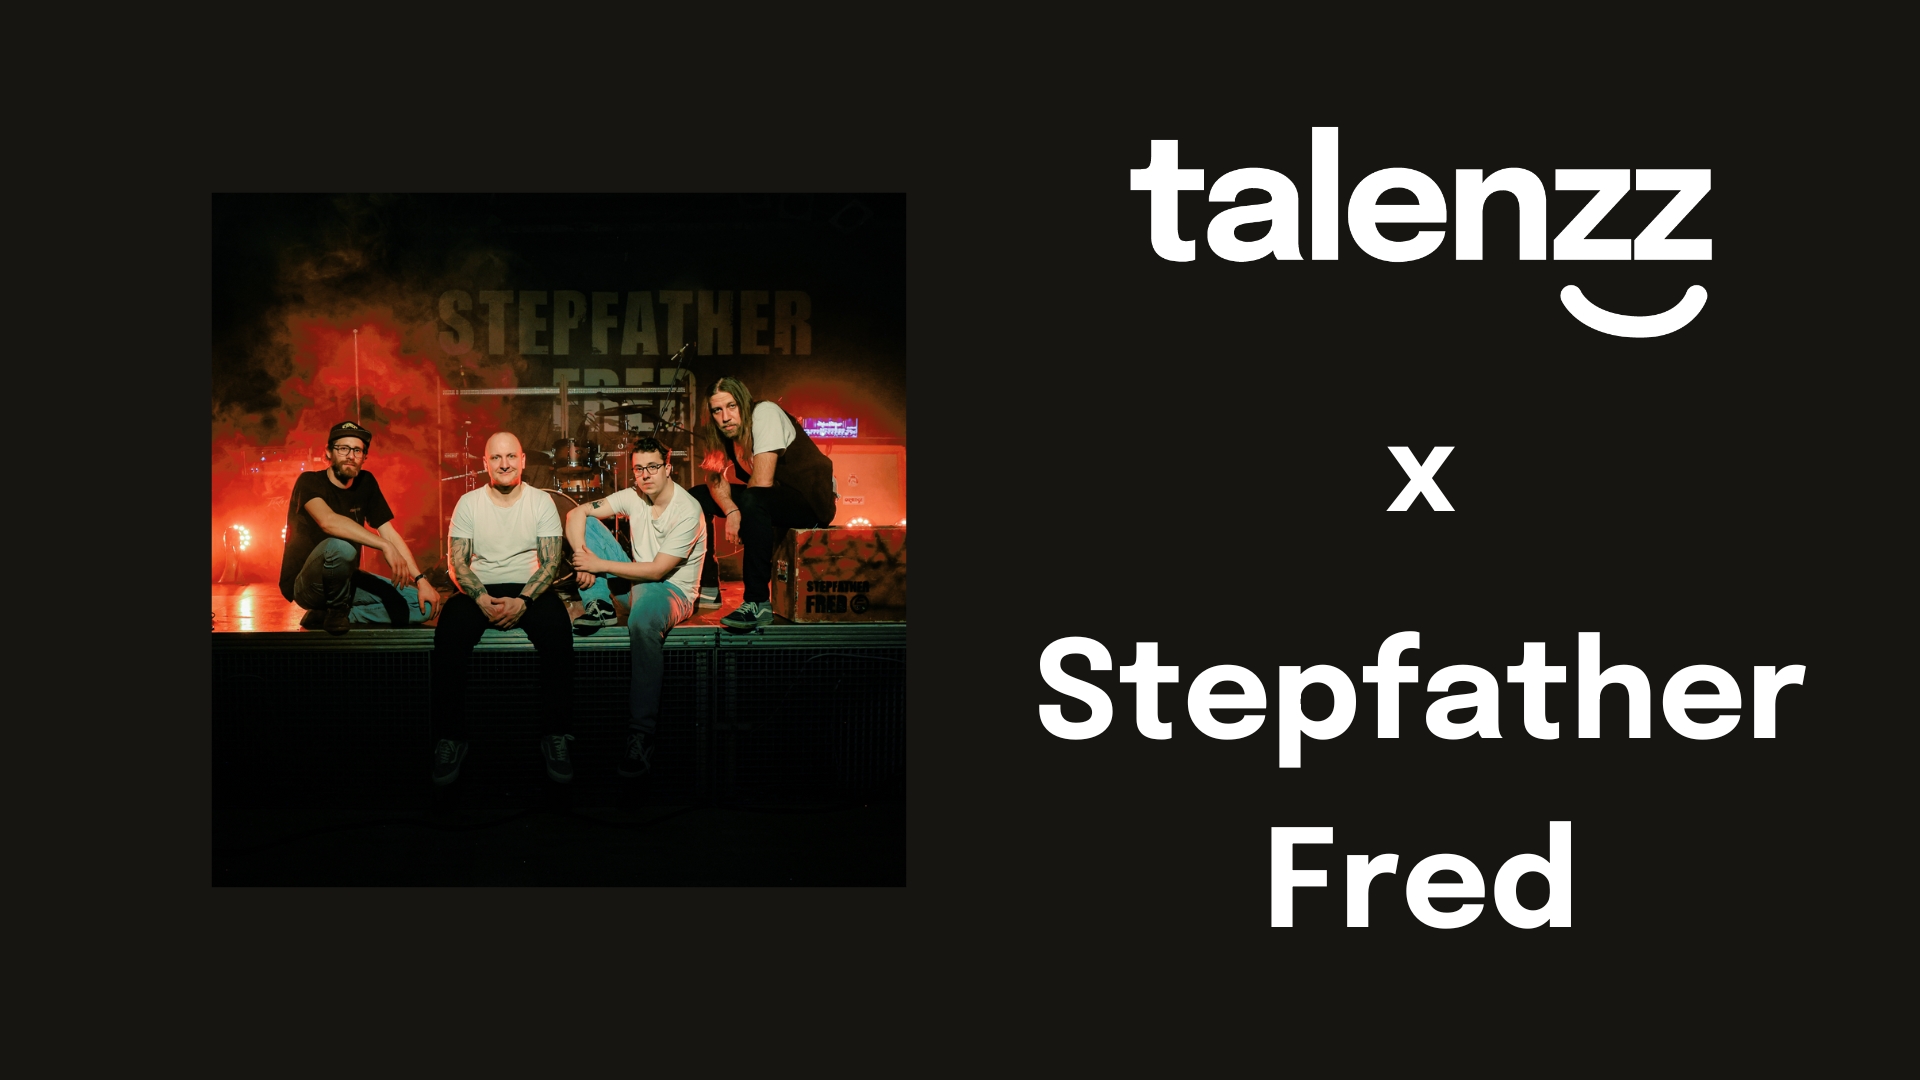 Neue Band "Stepfather Fred" auf talenzz! // New band "Stepfather Fred" on talenzz!